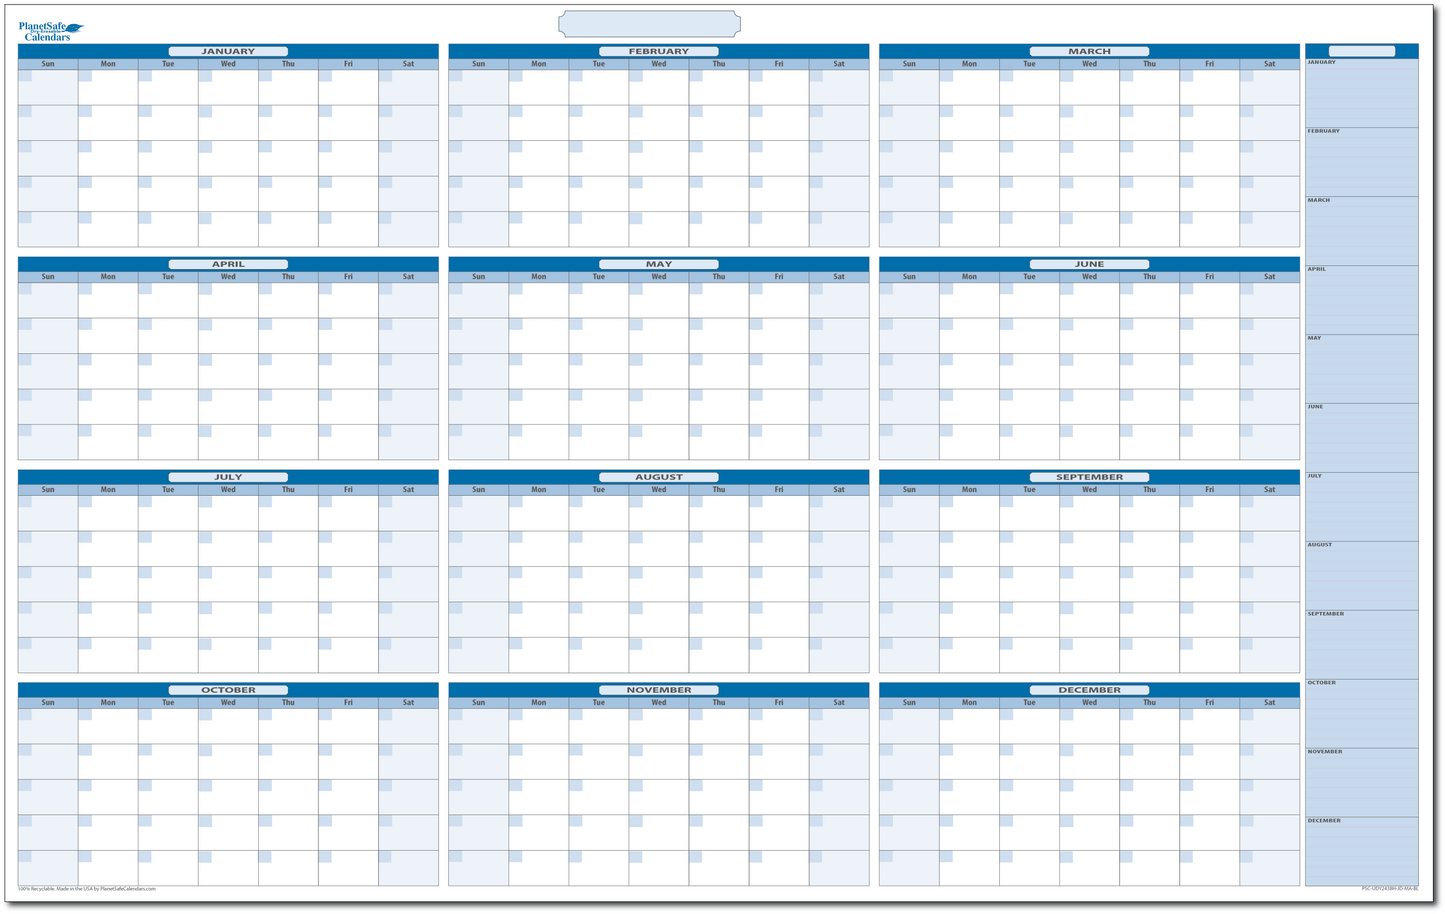 Yearly Undated Dry Erasable Wall Calendar with Next Year Planning Area